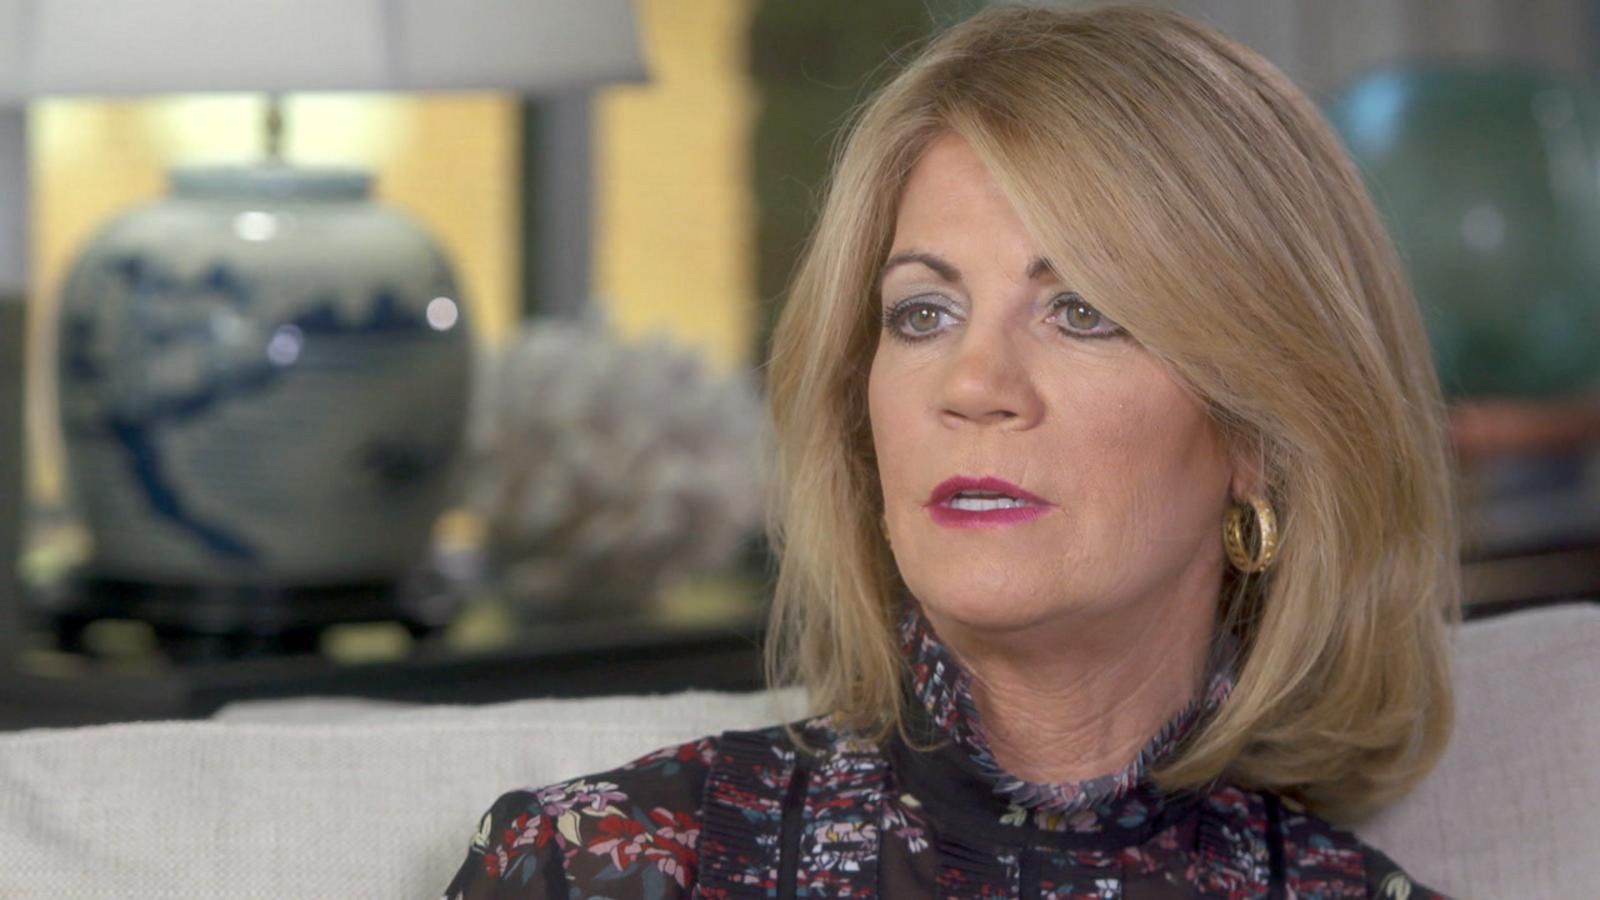 Laurie Luhn Says Roger Ailes Sexually Harassed Her For Years I Went Through Such Hell Abc News